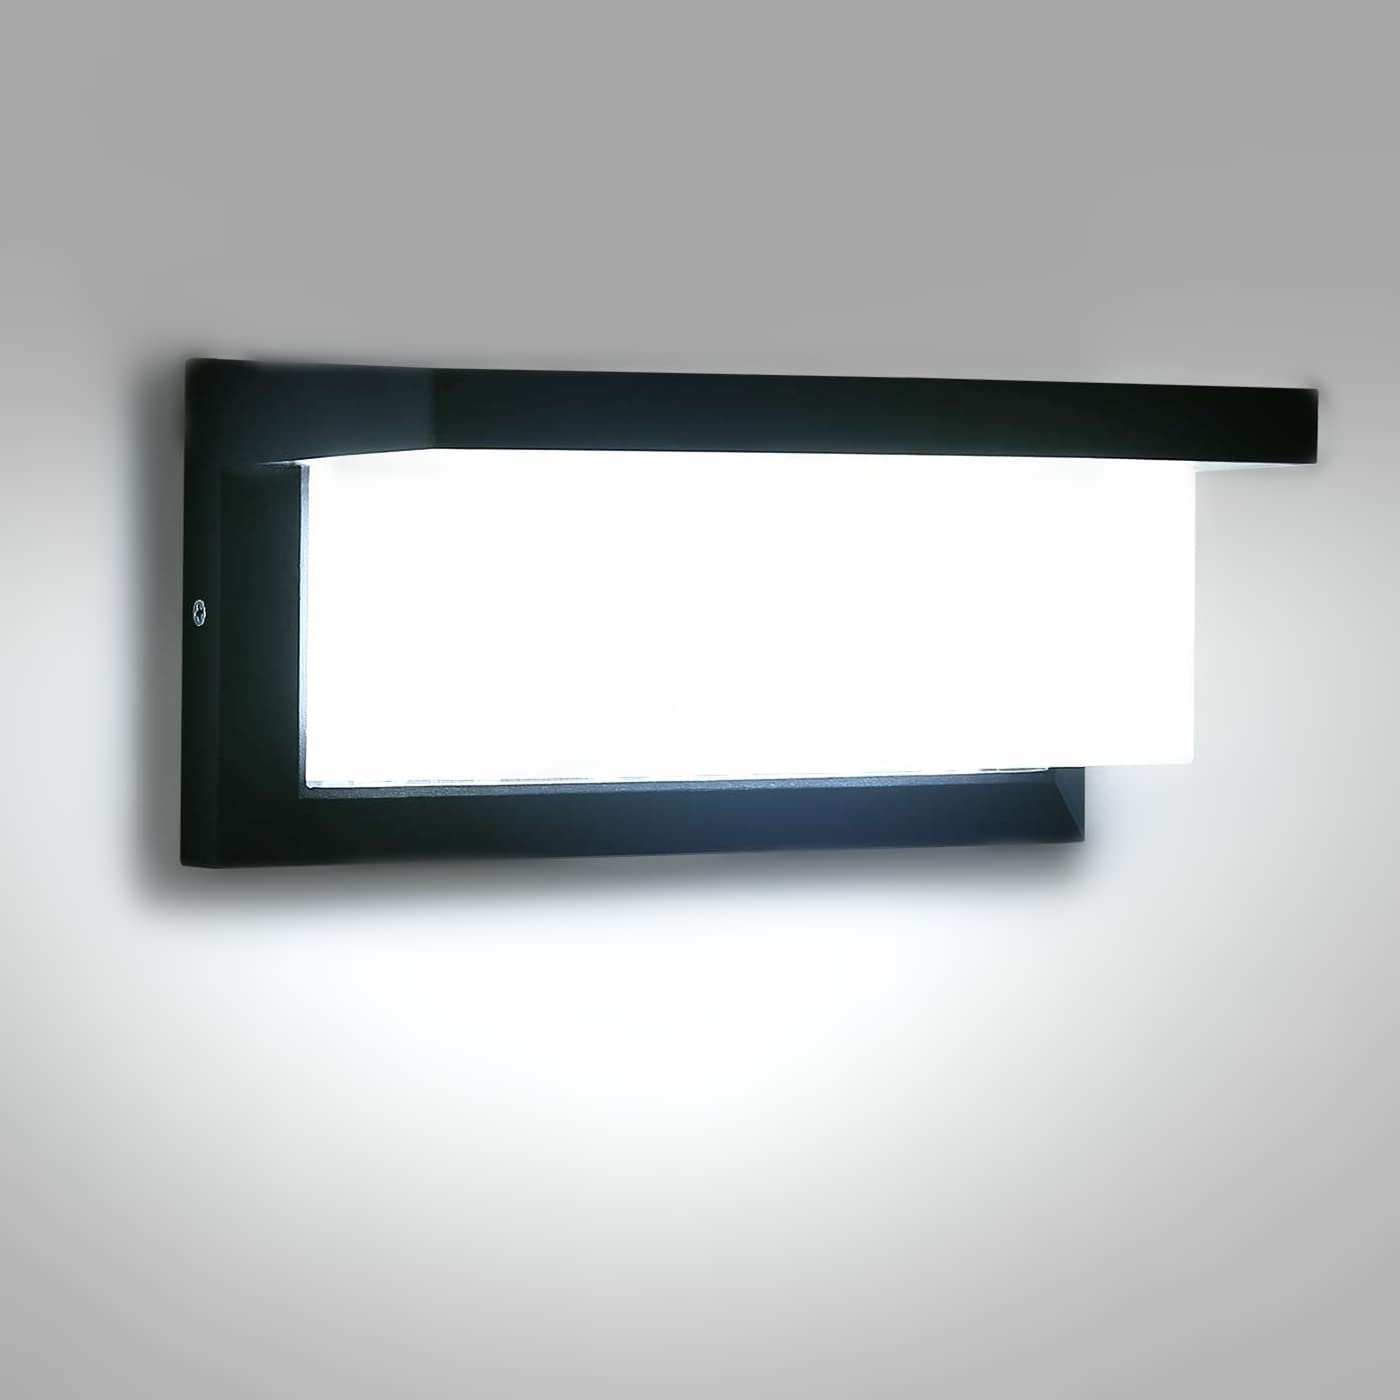 Lightess 18W Outdoor Wall Light IP65 Waterproof Wall Lamp Exterior Bulkhead Wall Lights Garden Anthracite Led Wall Sconce Light Fixture for Outside Porch Garage Corridor Workshop Patio - Cool White